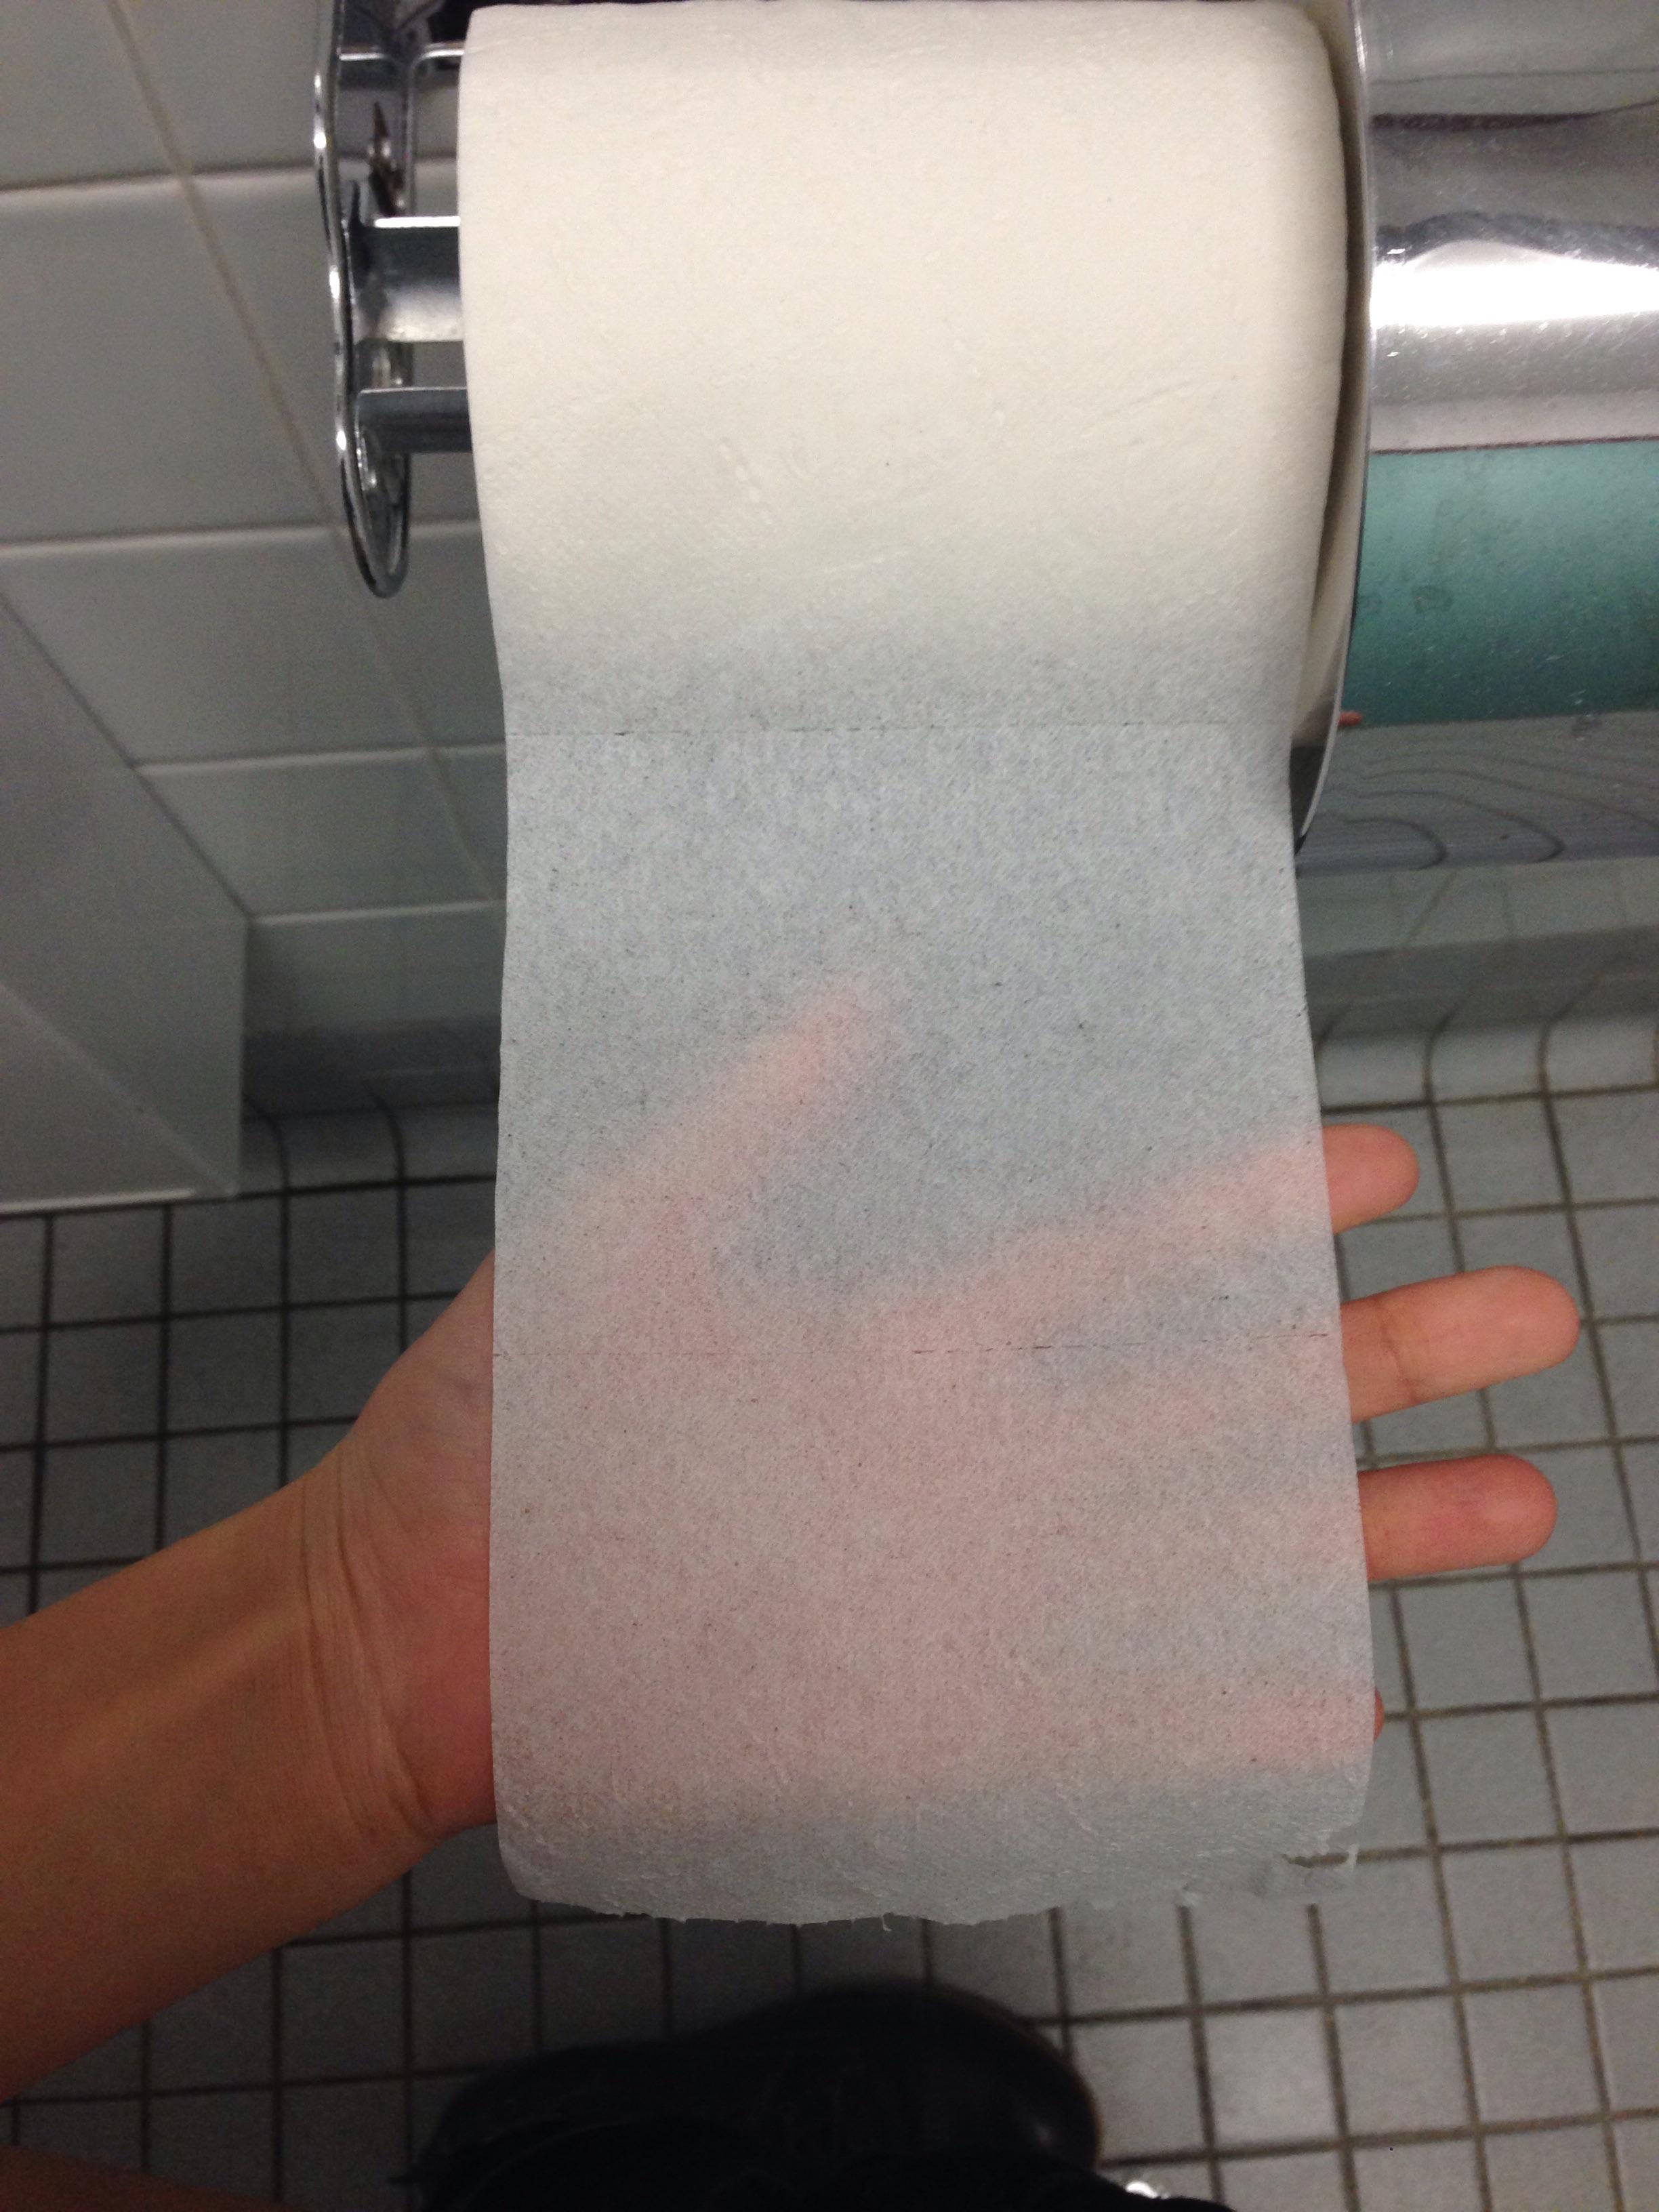 I work at an elementary school and the toilet paper is so thin that ...